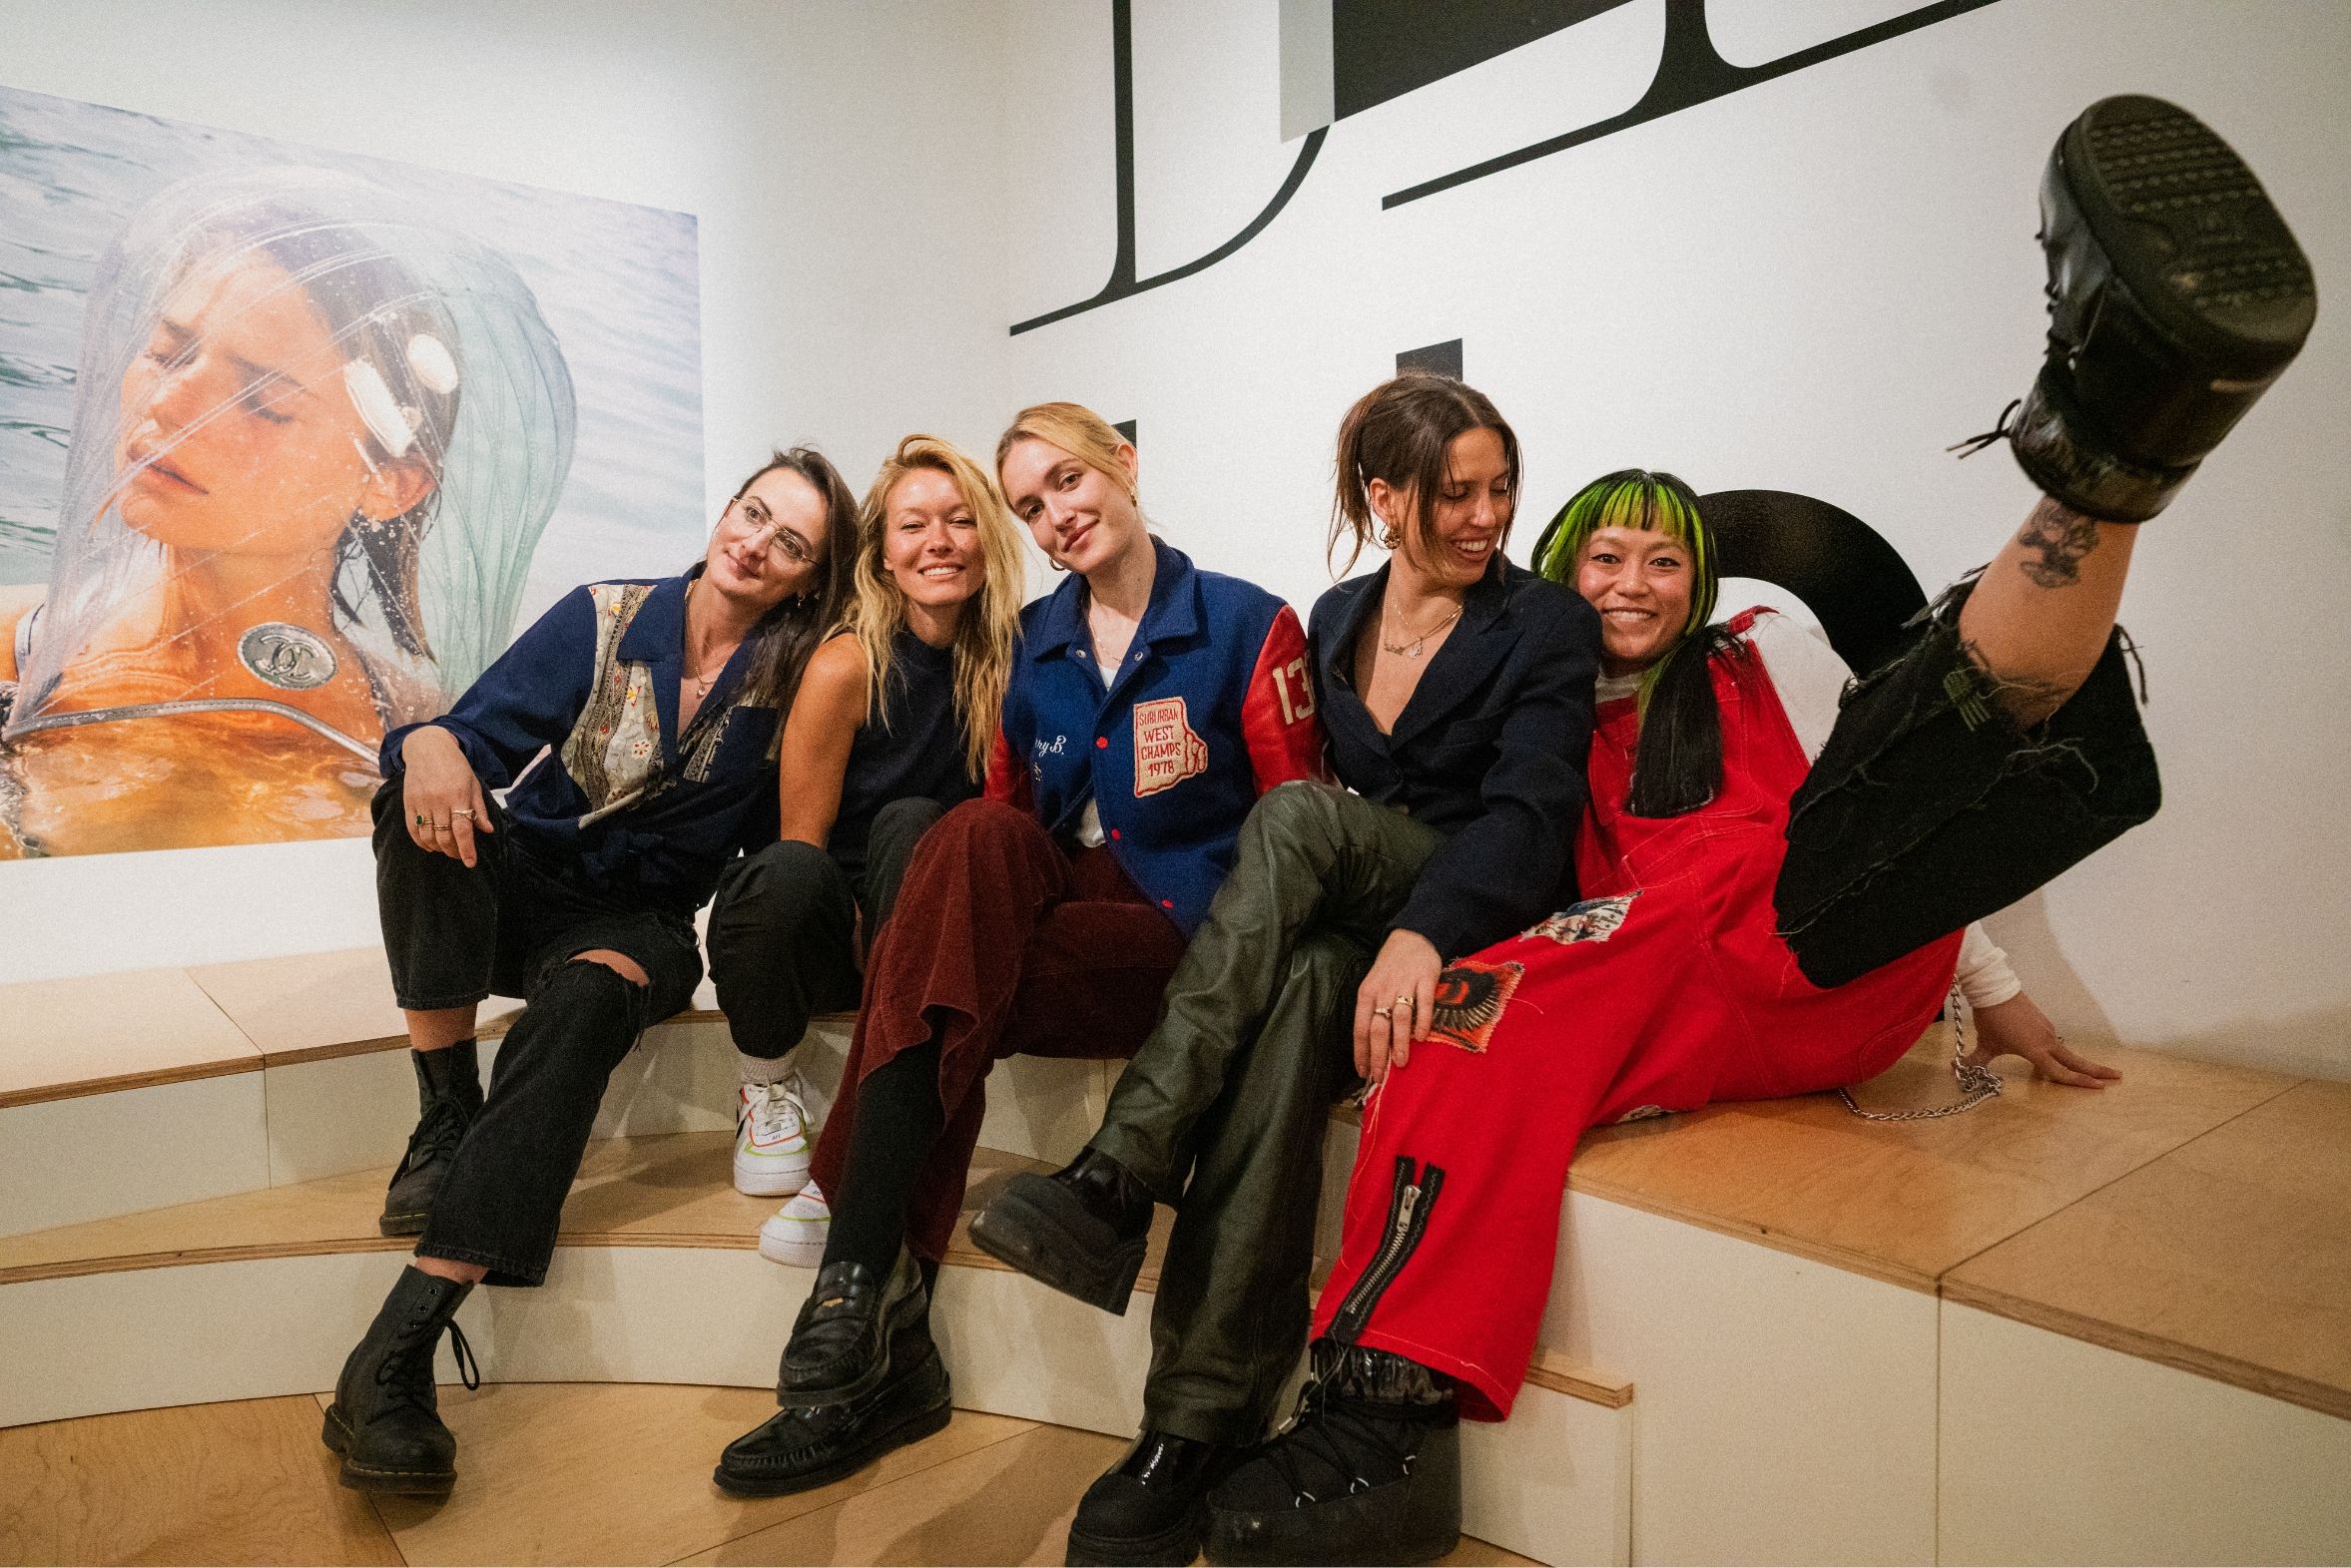 Amber, Carlotta, Christine and Natalie posing together in gallery. Smiling and Christine has her leg up.